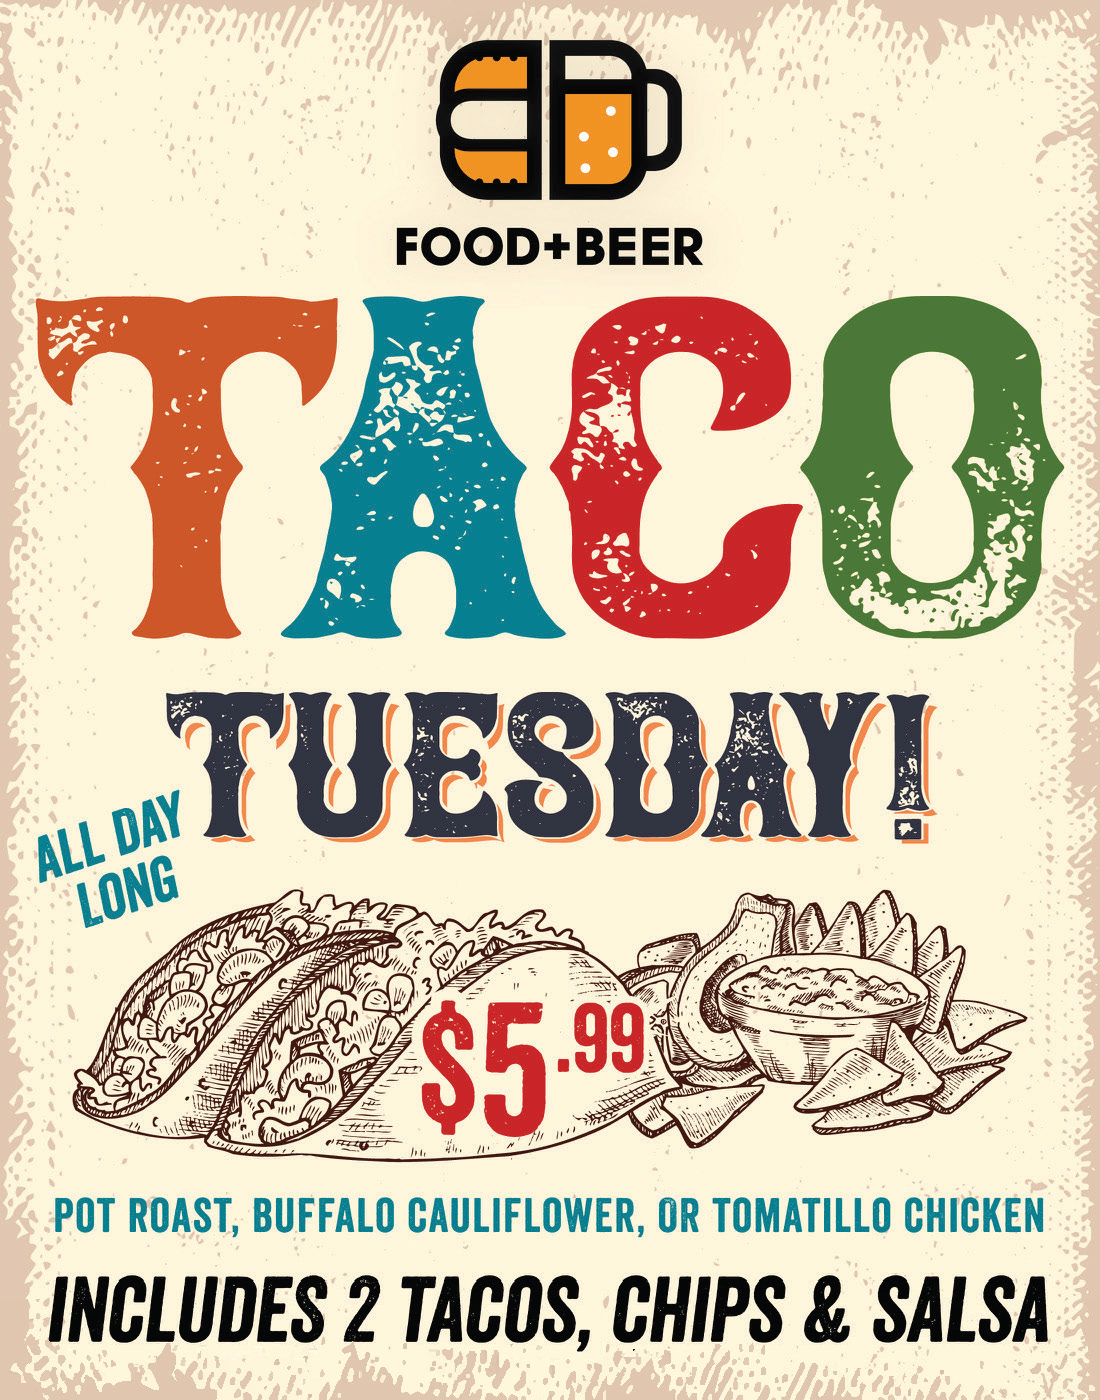 Food and Beer Taco Tuesday